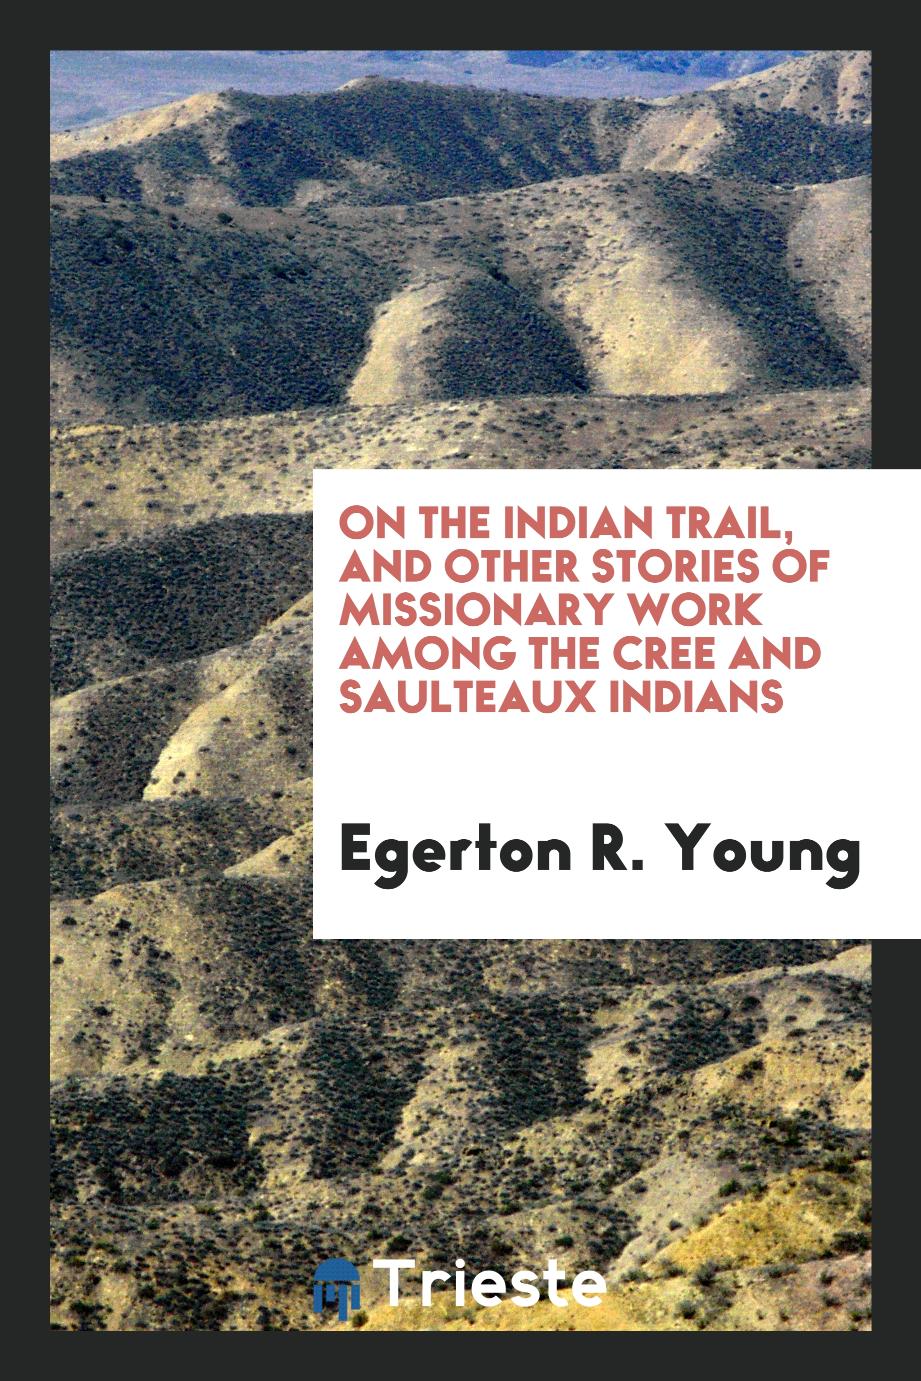 On the Indian trail, and other stories of missionary work among the Cree and Saulteaux Indians